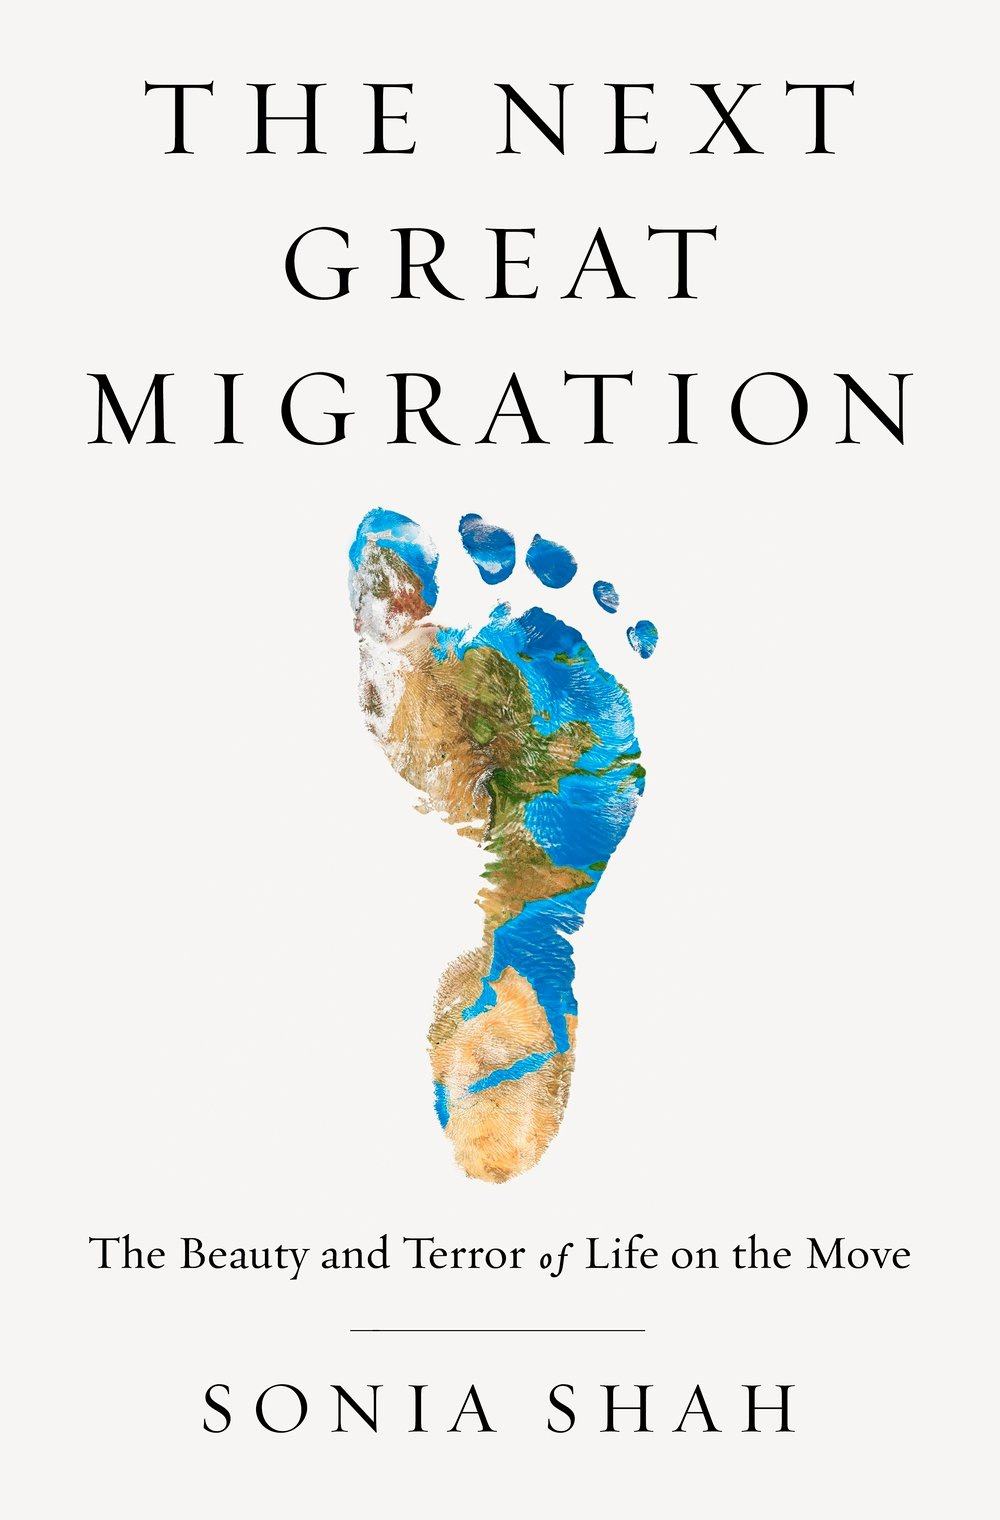 Cuoc dai di cu tiep theo,  The Next Great Migration anh 3